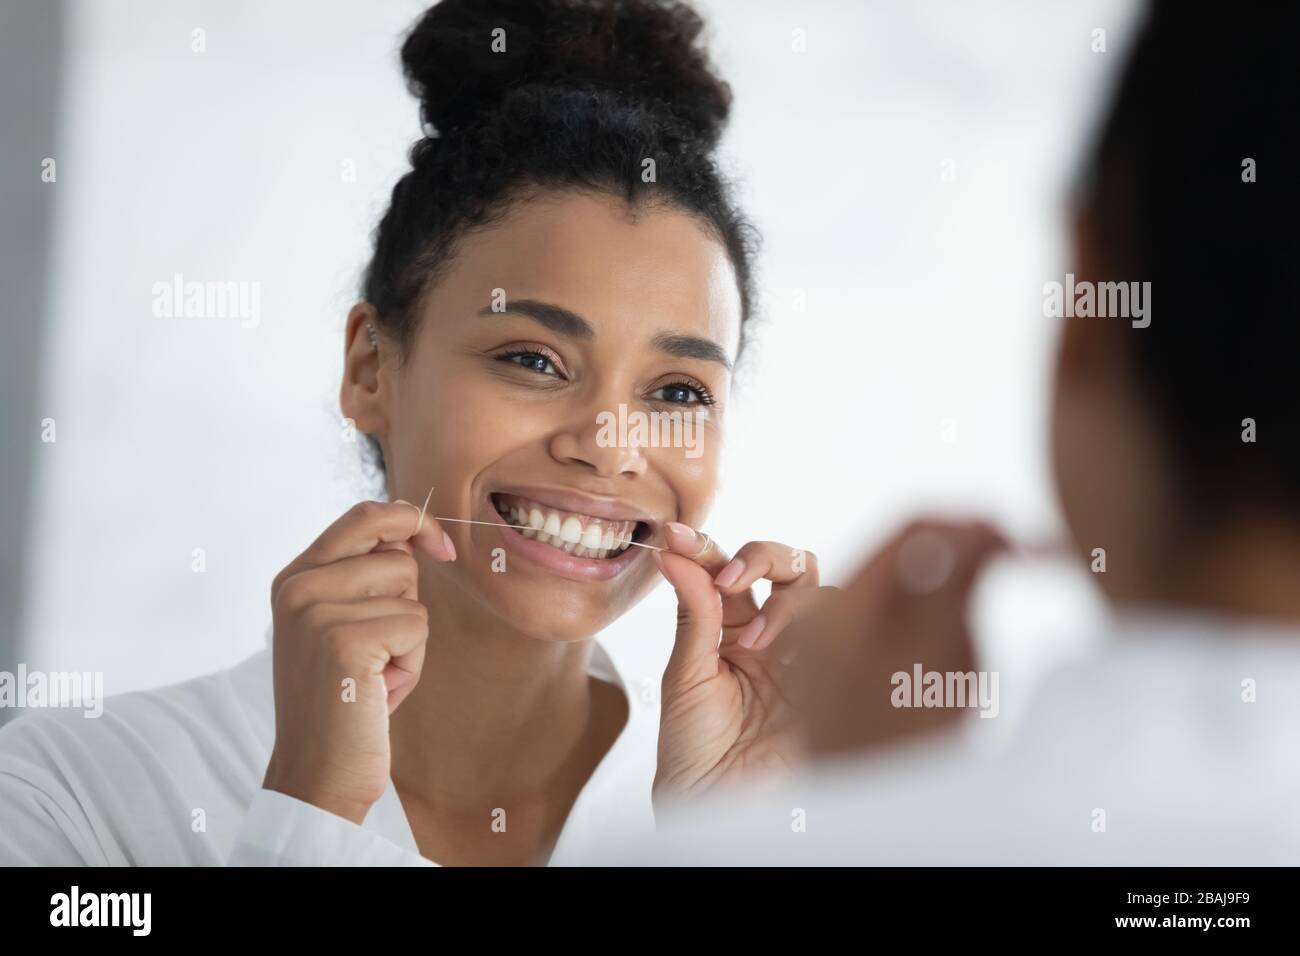 Beautiful smiling african woman holding dental floss cleaning teeth Stock Photo